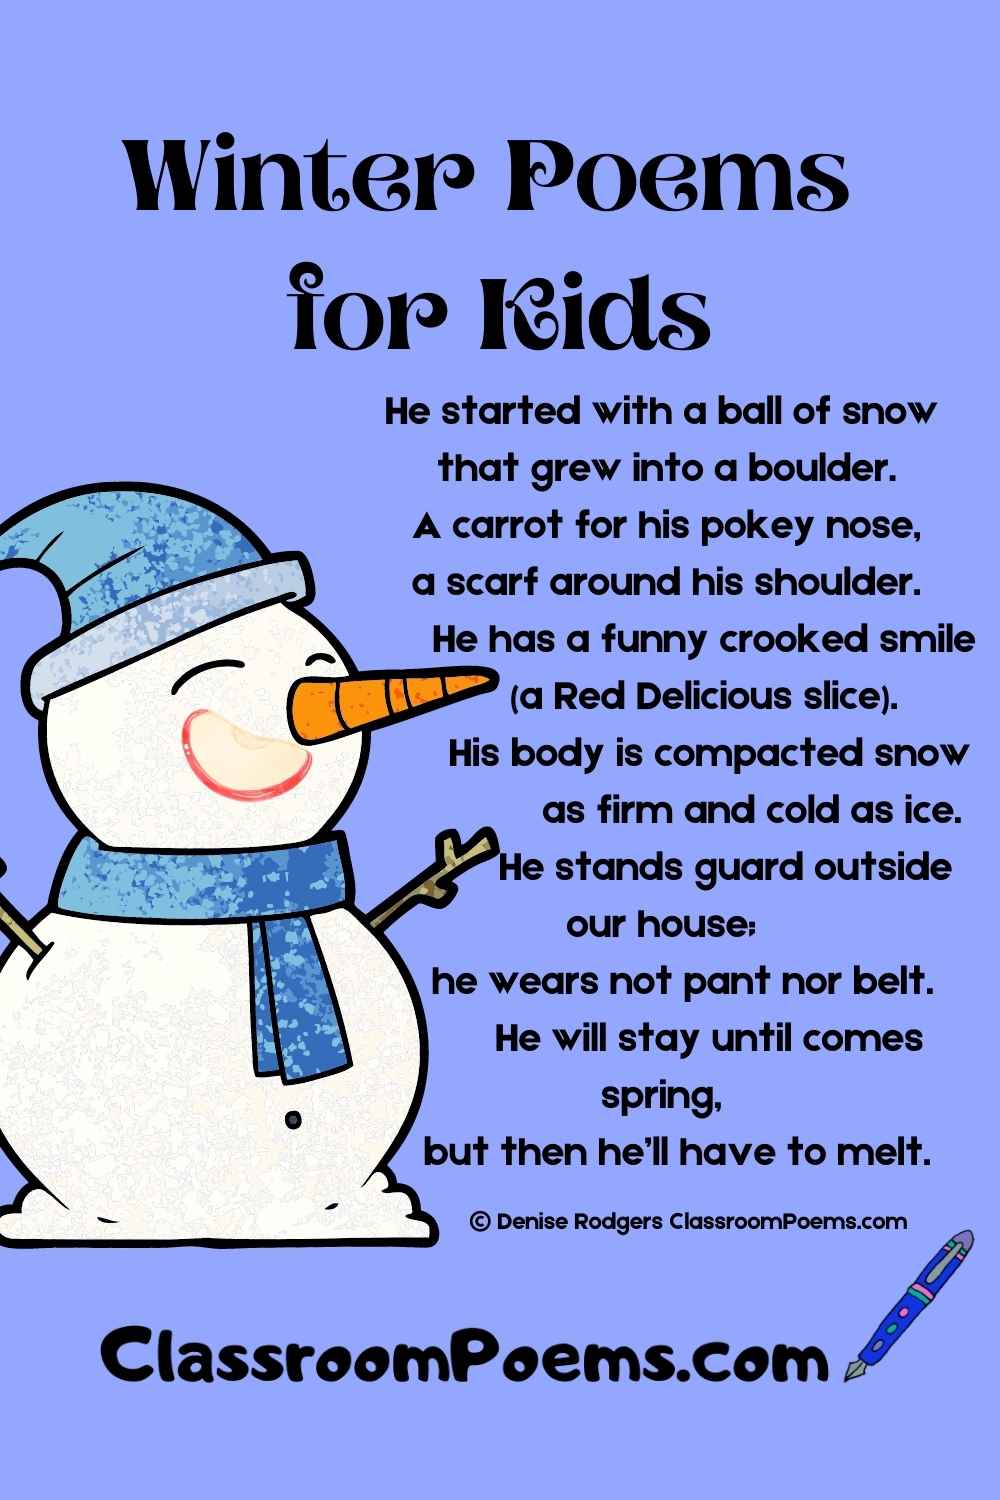 These winter poems for kids with take the bite out the winter months. Enjoy!